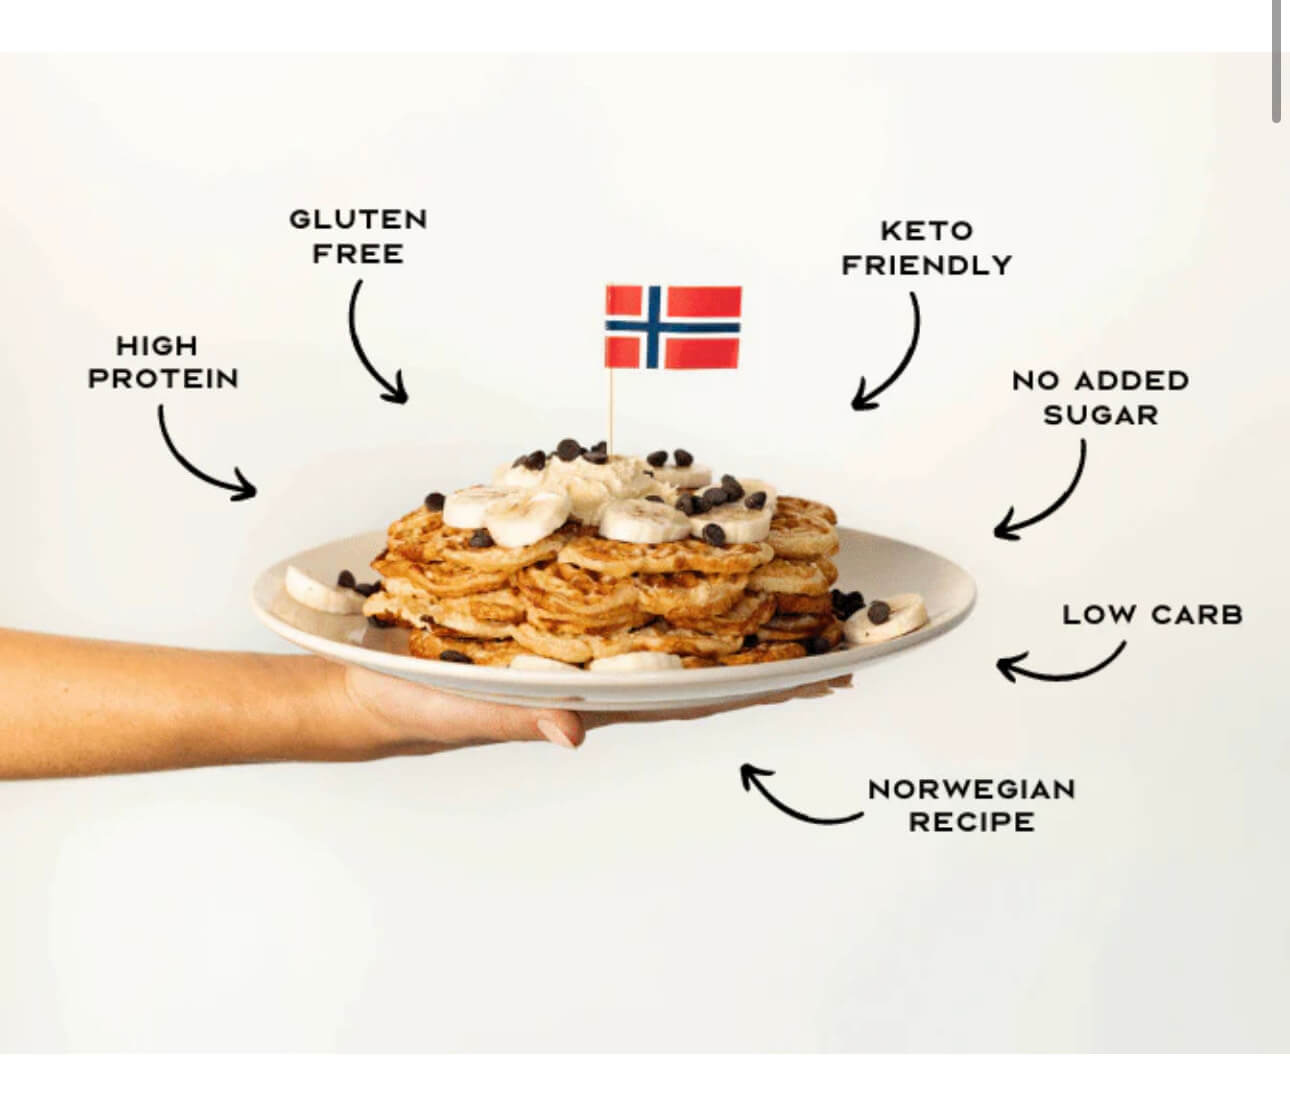 An image illustrating the value proposition of Viking Waffles. There is a hand holding a plate of waffles, topped with bananas, chocolate chips, and a small Norwegian flag. Surrounding the plate are words explaining the product benefits: high protein, gluten-free, keto-friendly, no added sugar, low card, and Norwegian recipe. 